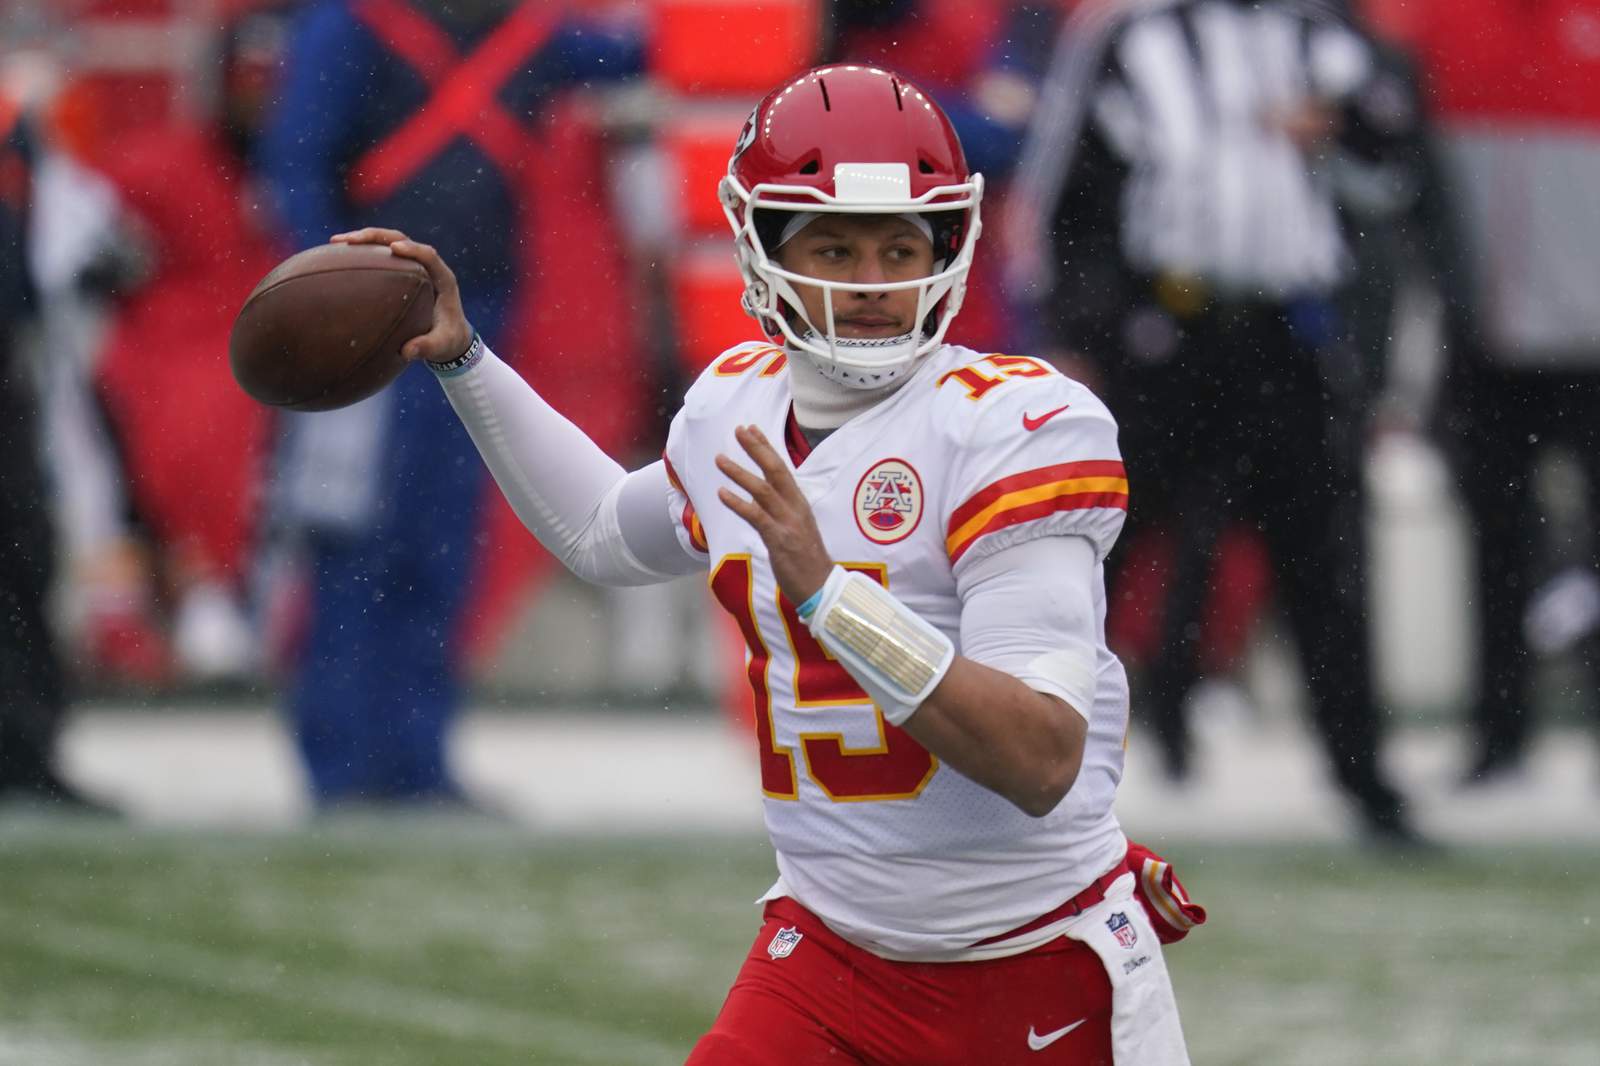 'Just a normal guy': Chiefs' Mahomes shares life with world